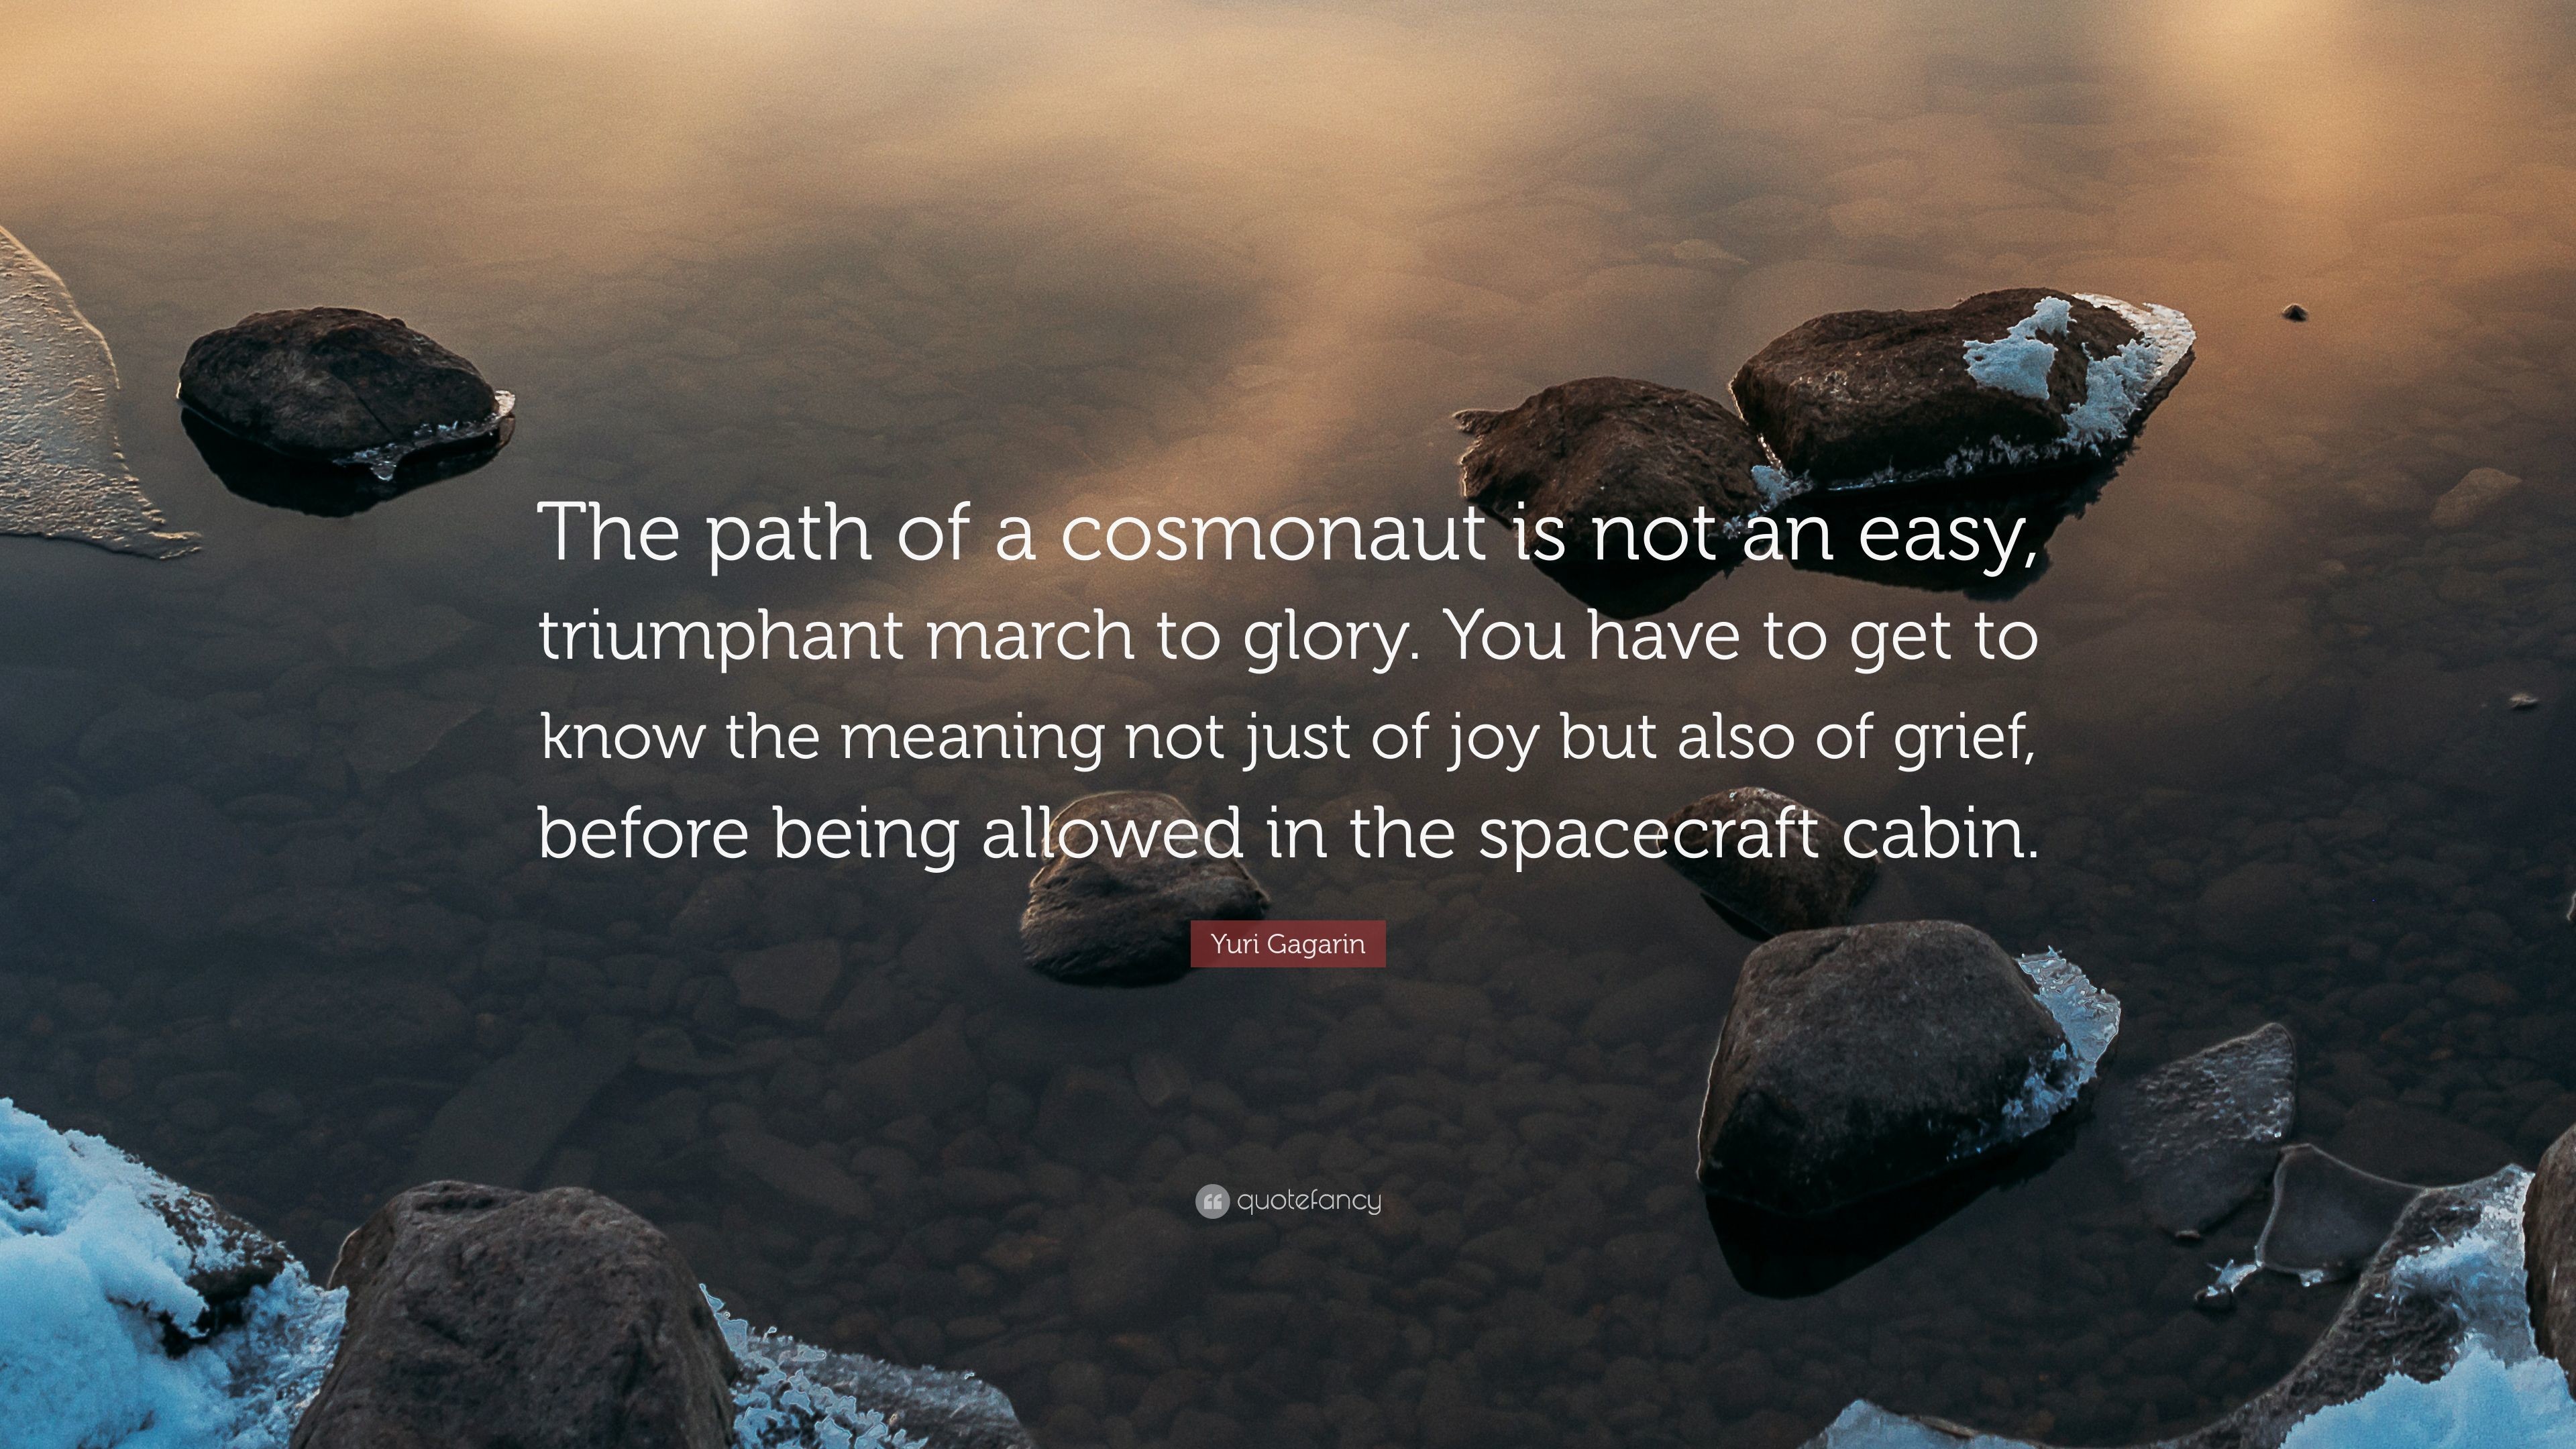 3840x2160 Yuri Gagarin Quote: “The path of a cosmonaut is not an easy, triumphant